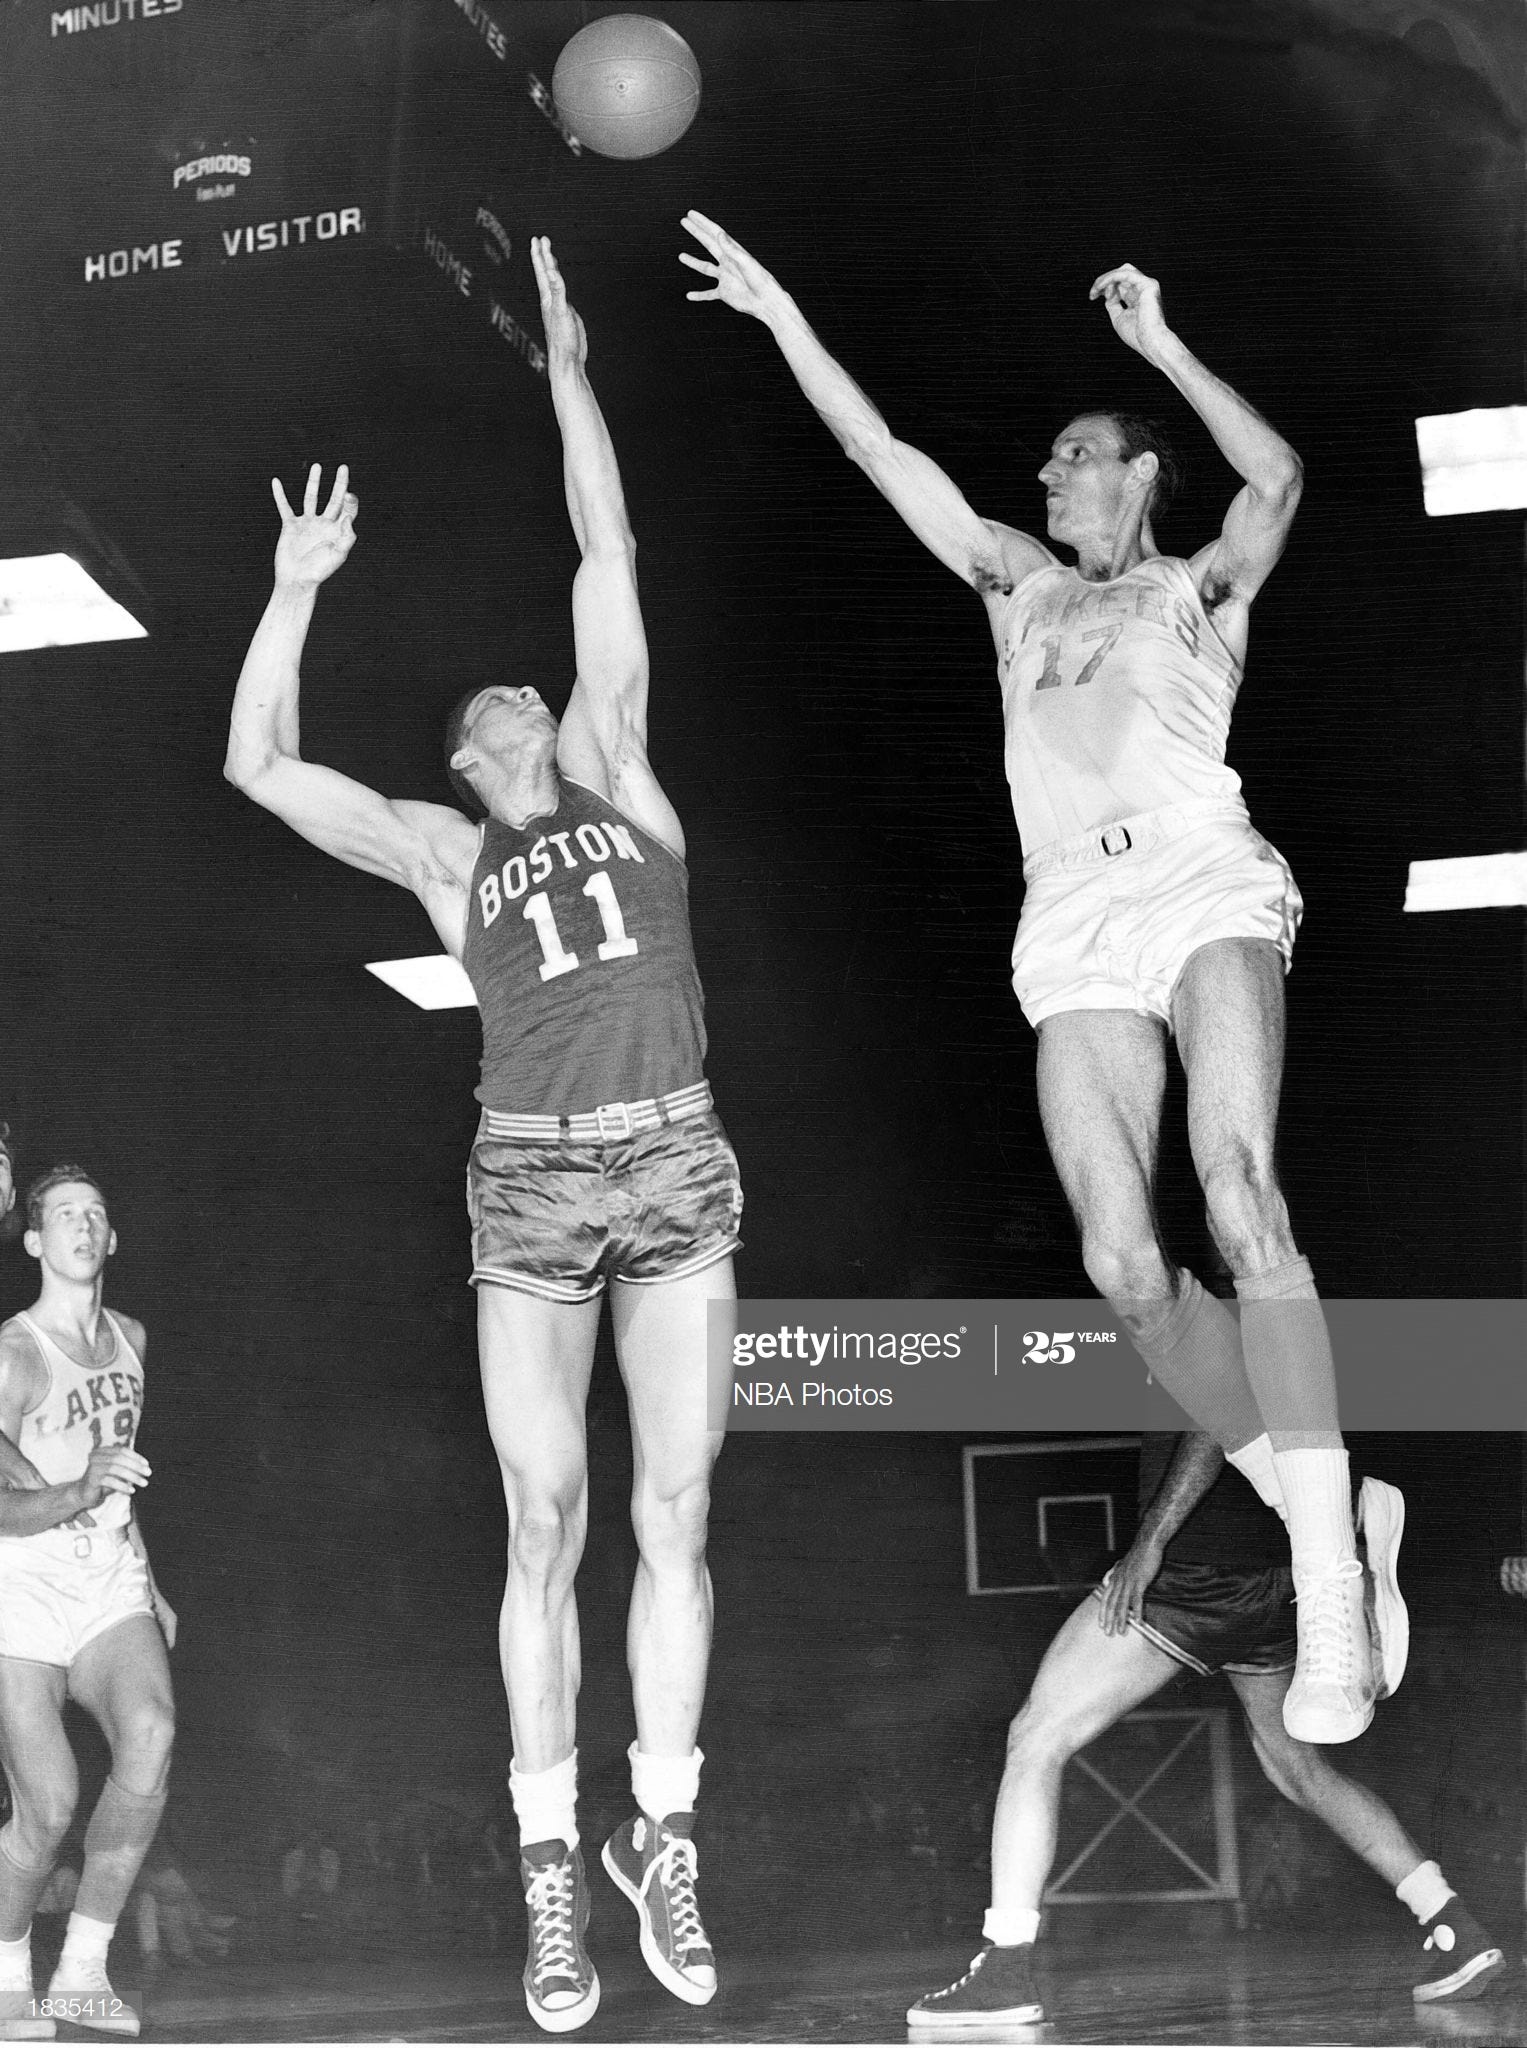 Los Angeles Lakers retired George Mikan's jersey number 99 🔥 George Mikan  led the Minneapolis Lakers to 5 championship titles from 1949-54.